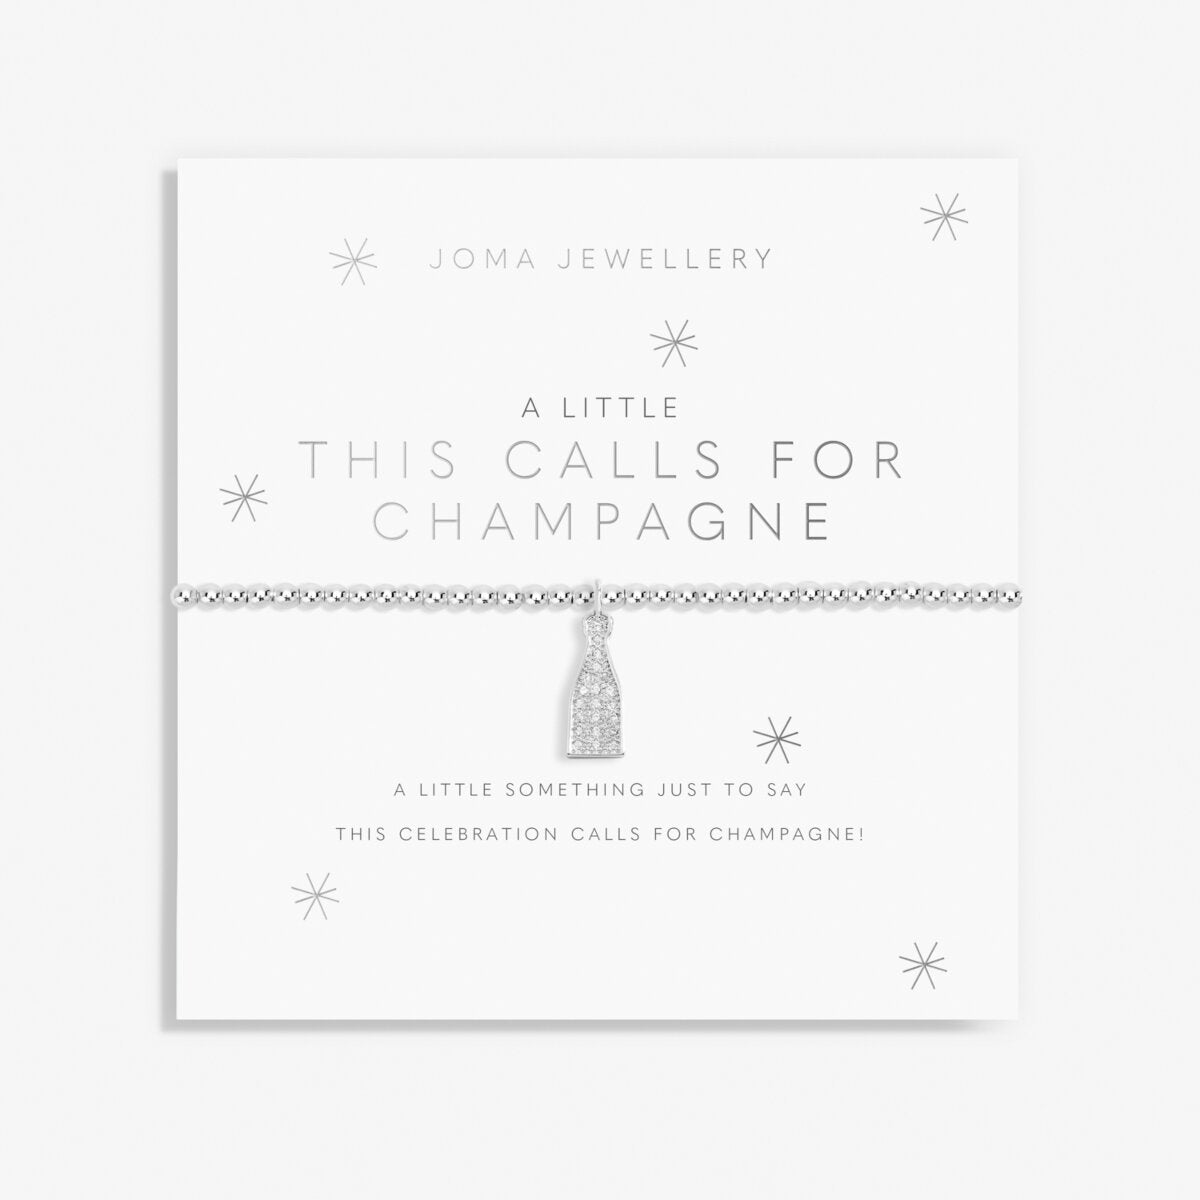 Joma Jewellery 'A Little' This Calls For Champagne